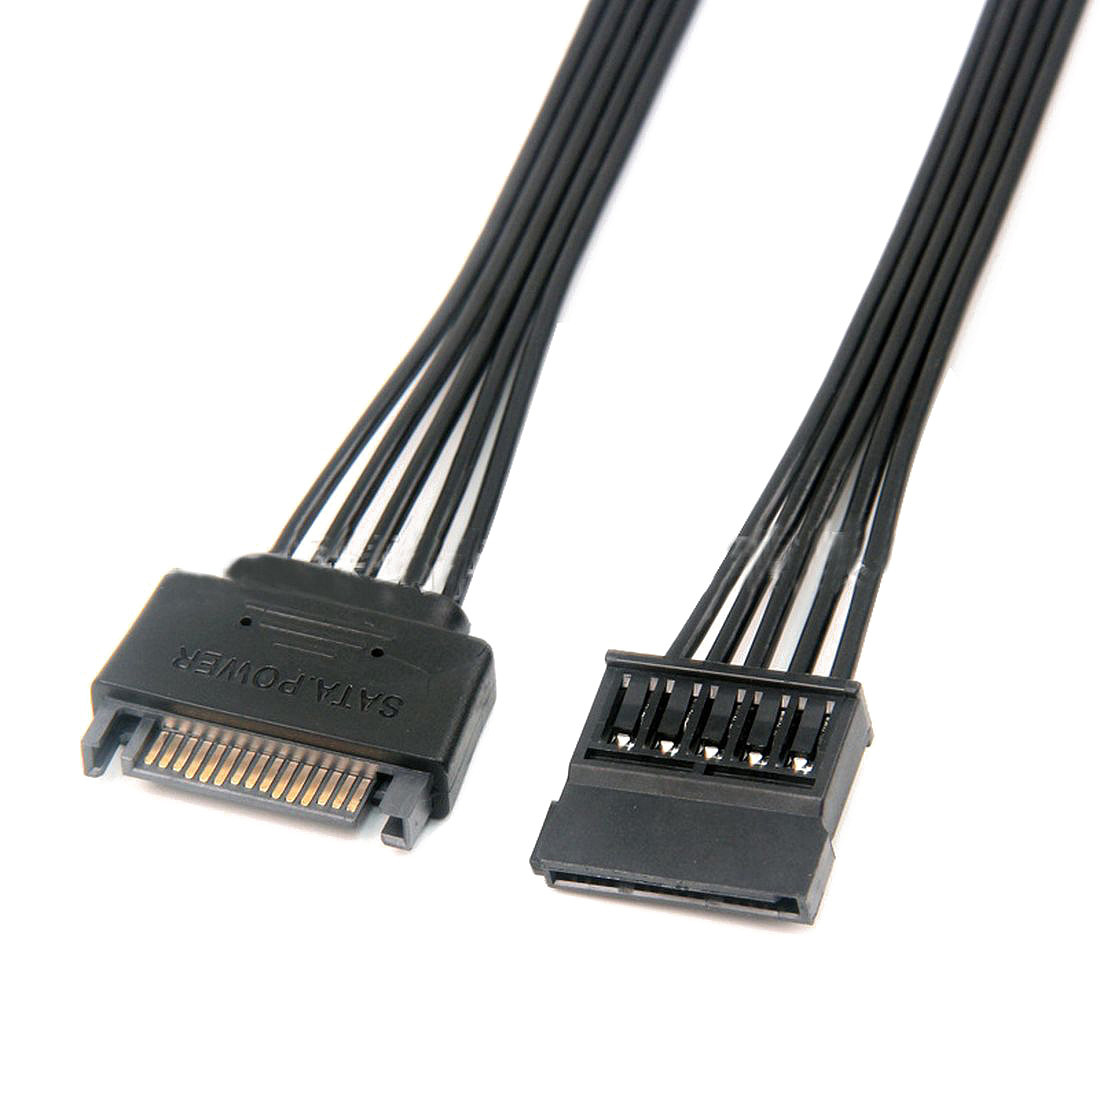 US$ 1.65 - XT-XINTE SATA 15Pin Male to Female Power Extension Cable HDD ...